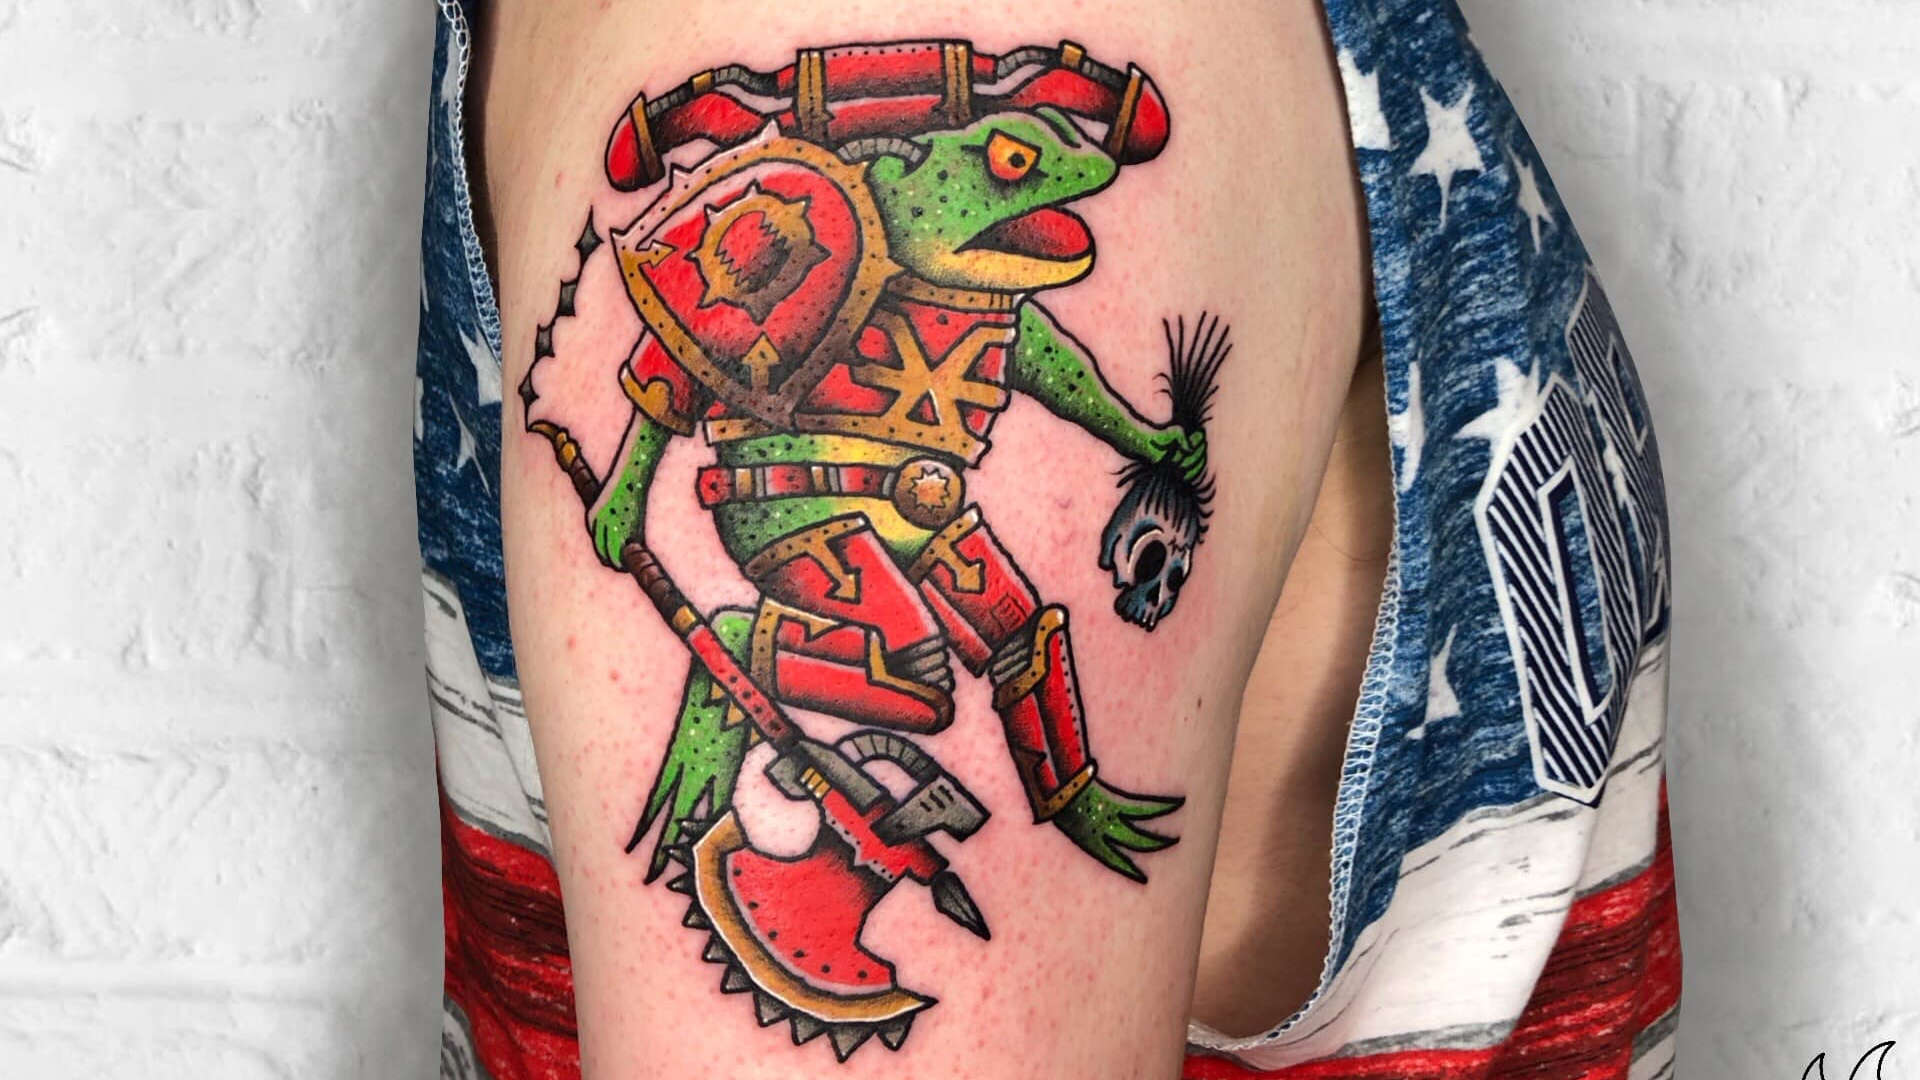 moonaudia on Twitter look how cute this frog is  tattoo  httpstco8p3nLHkGV6  X